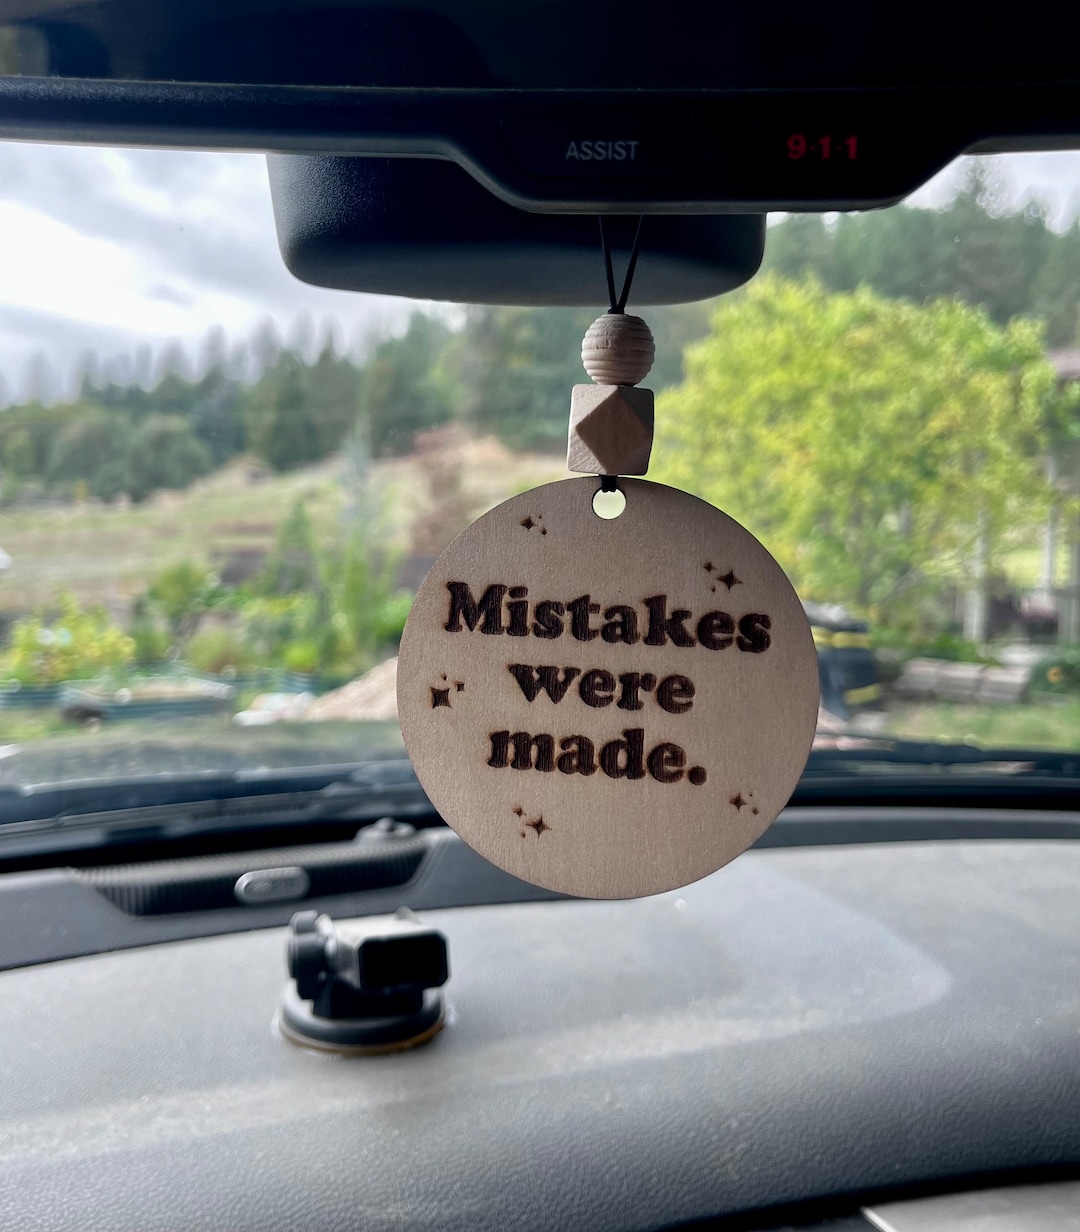 Rear View Mirror Accessories Be Savage Not Average Unfinished Wood & Wood  Beads 